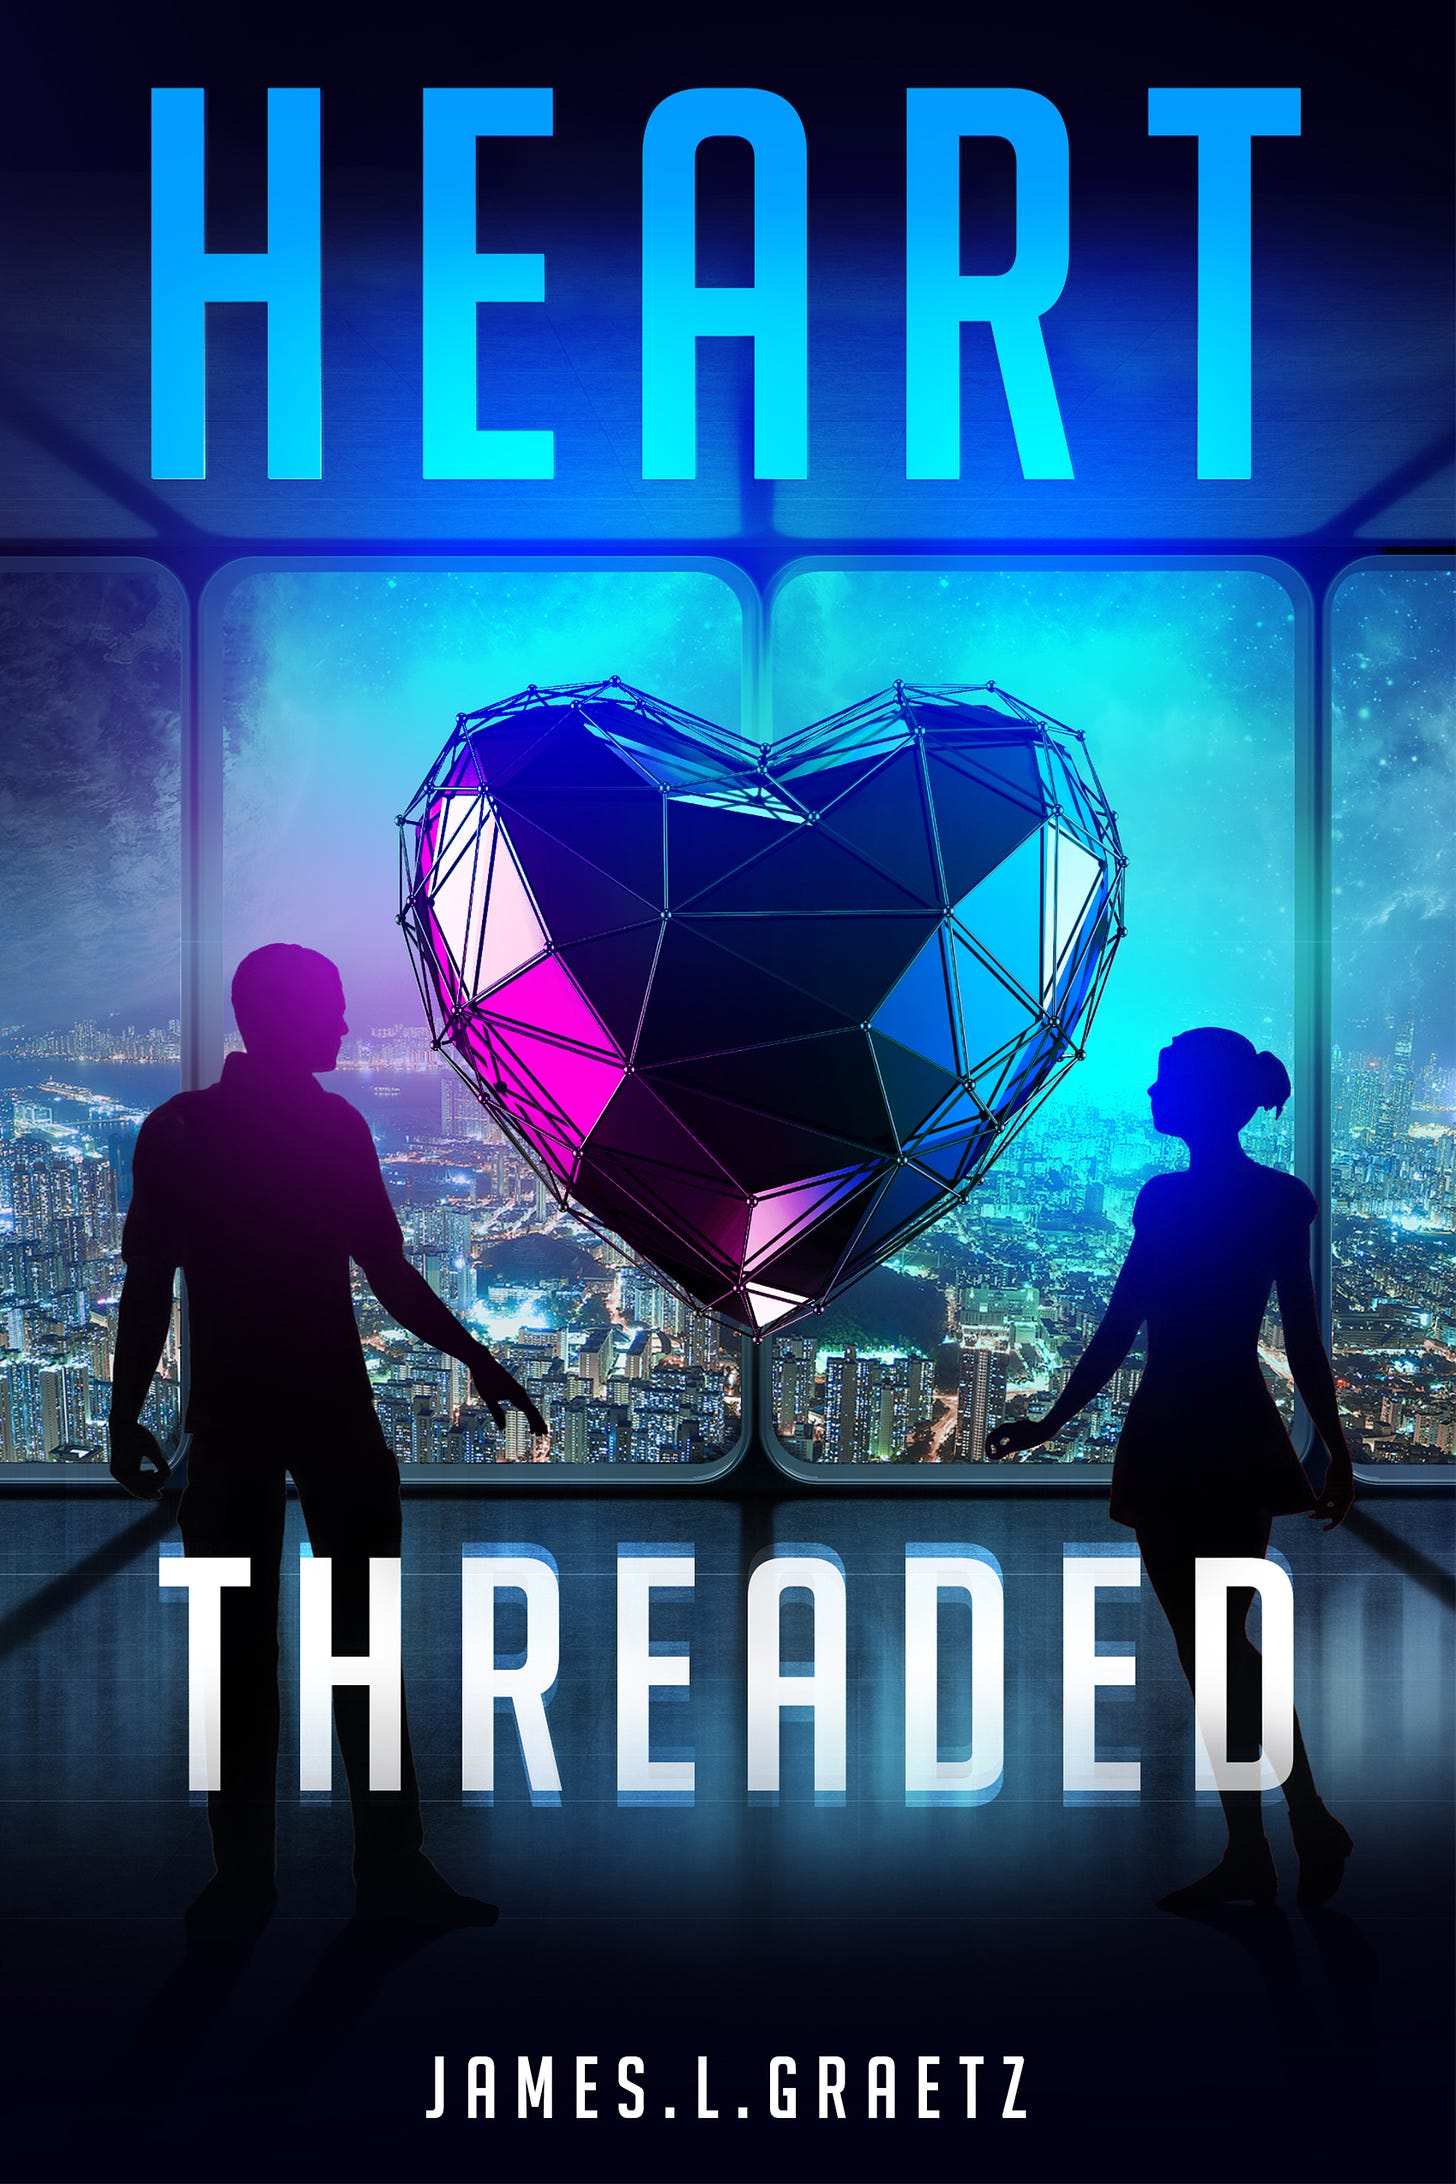 Heart Threaded, by James L Graetz. Novel cover, a polygon shiny glass faceted heart in the center with a sillhouetted man and woman either side with a city in the back ground.